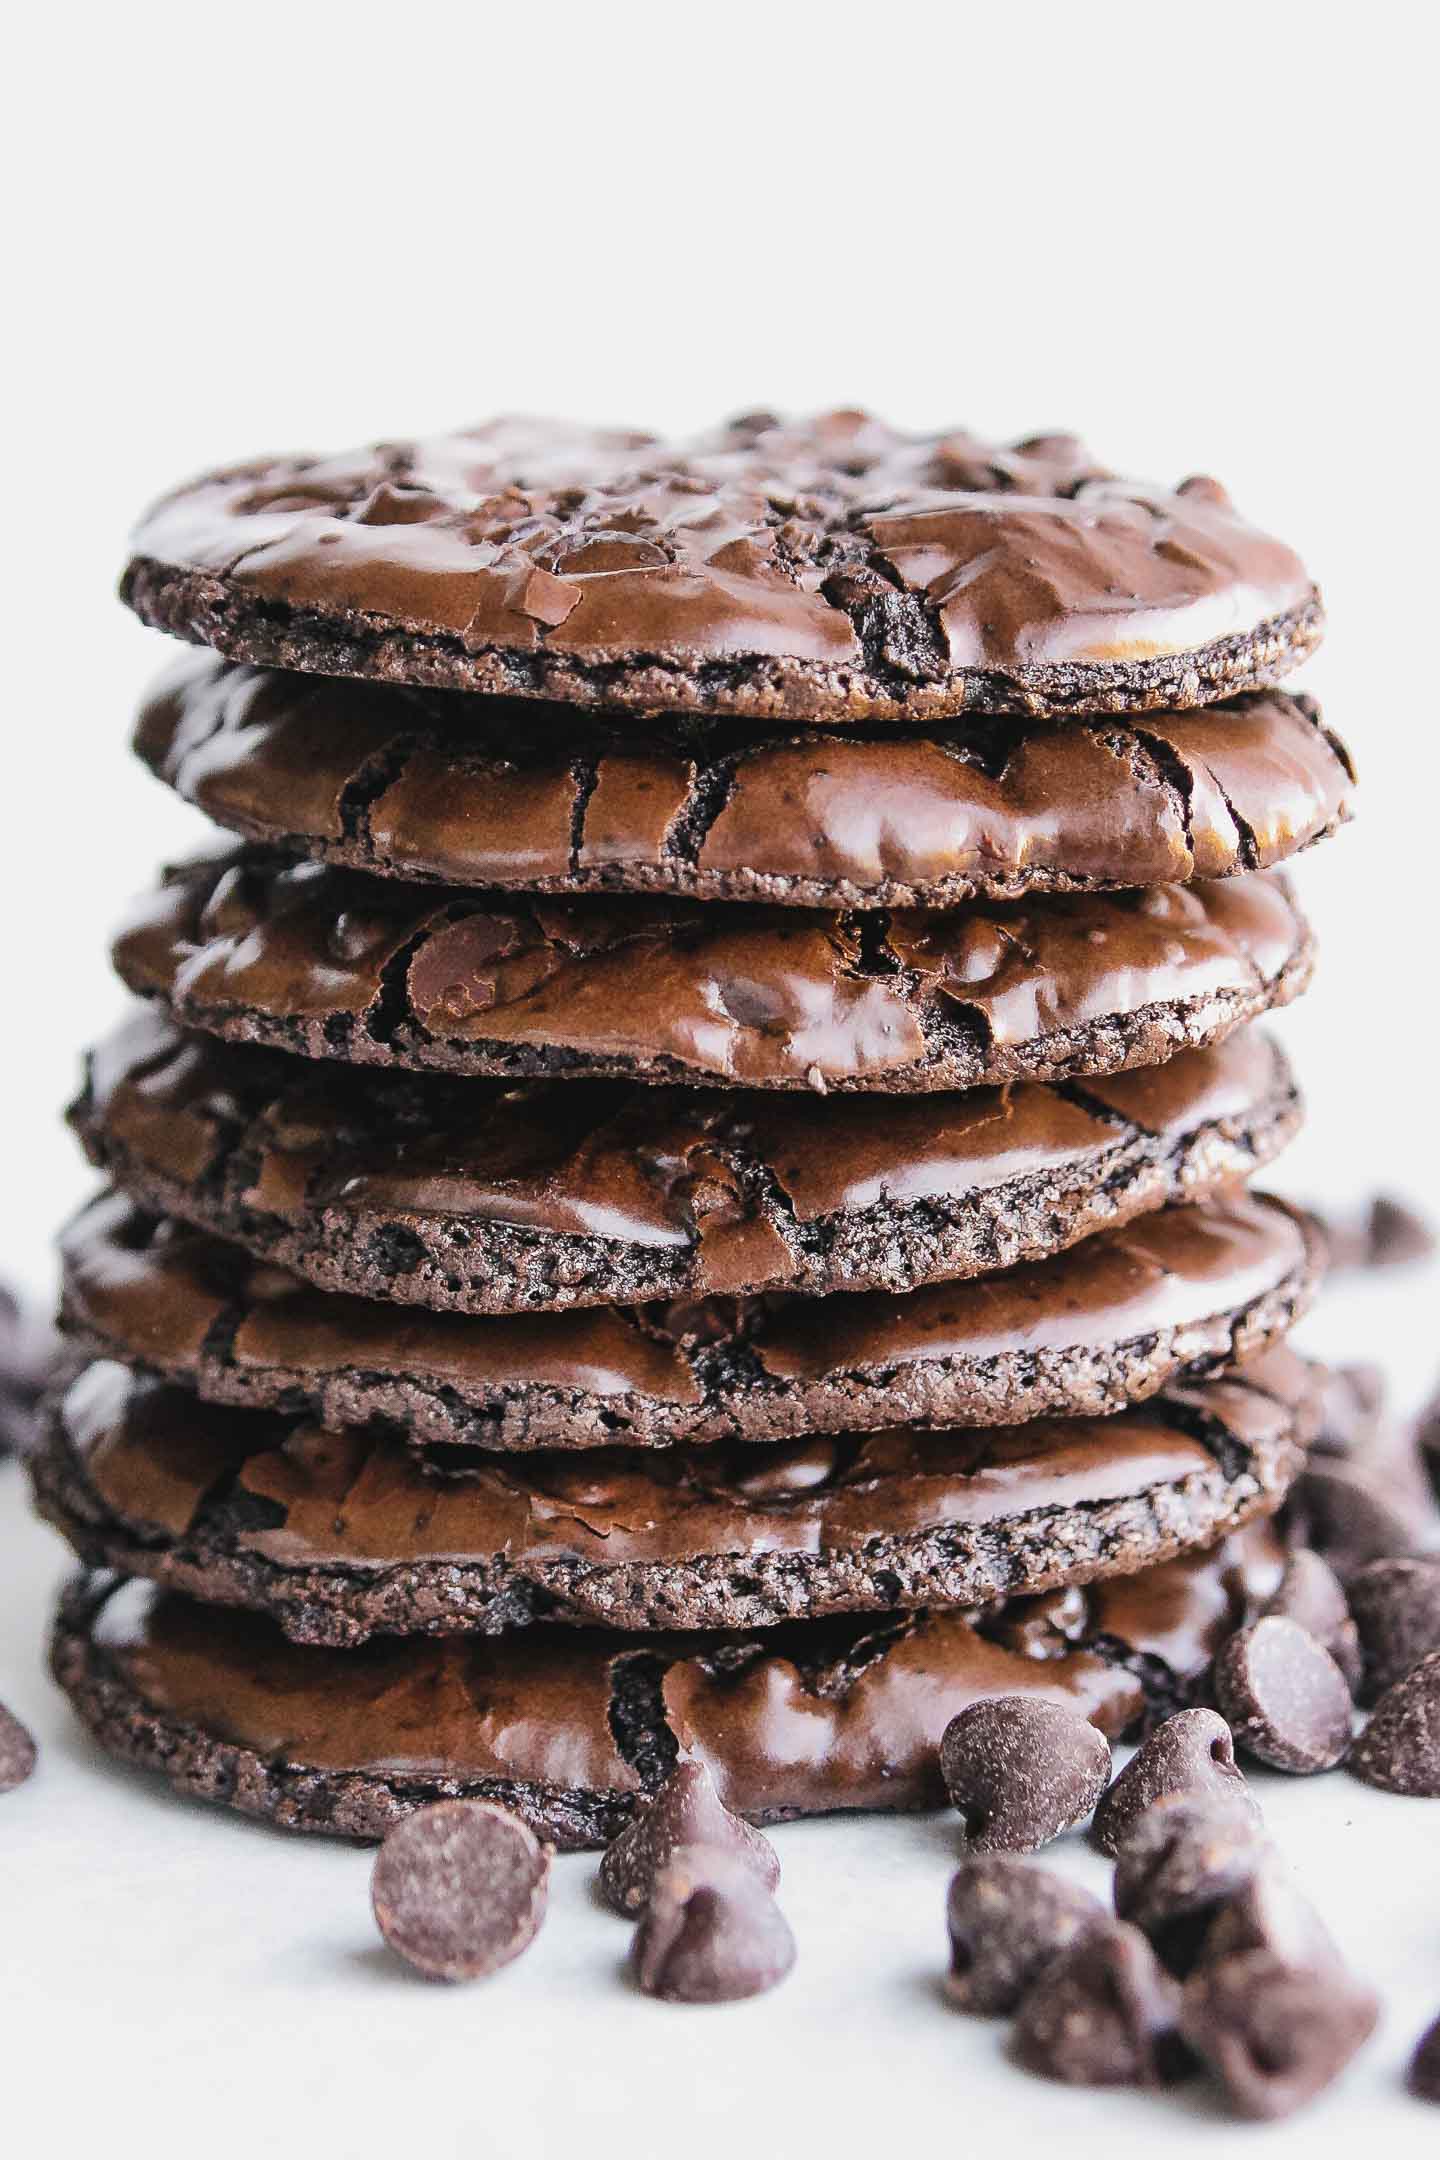 A stack of seven Flourless Chocolate Cookies.